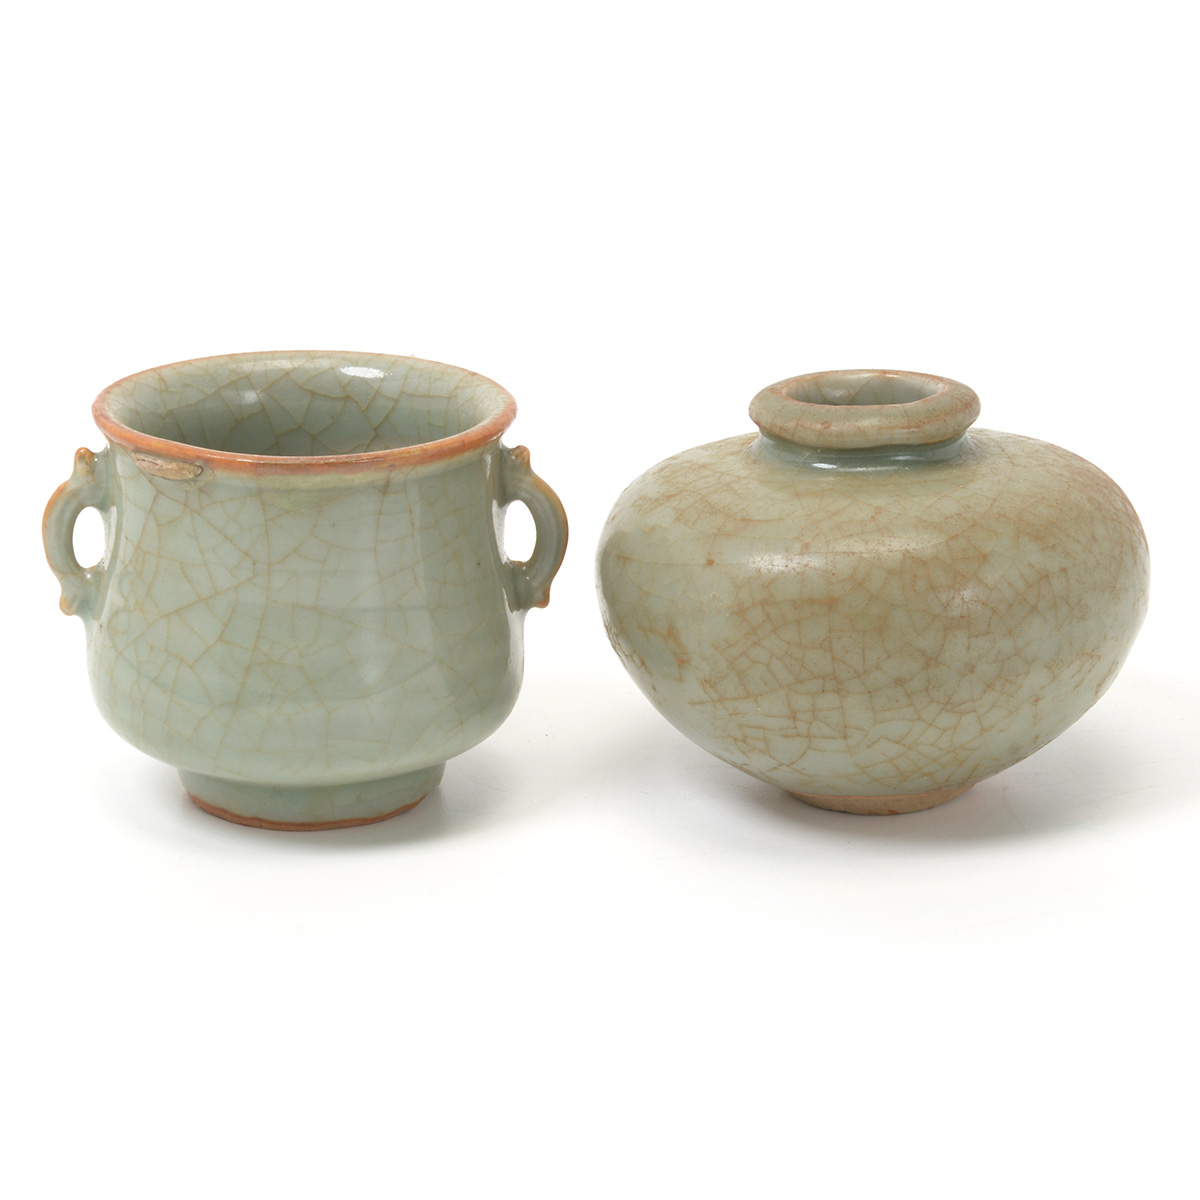 Two Small Longquan Celadon Glazed Items, Ming